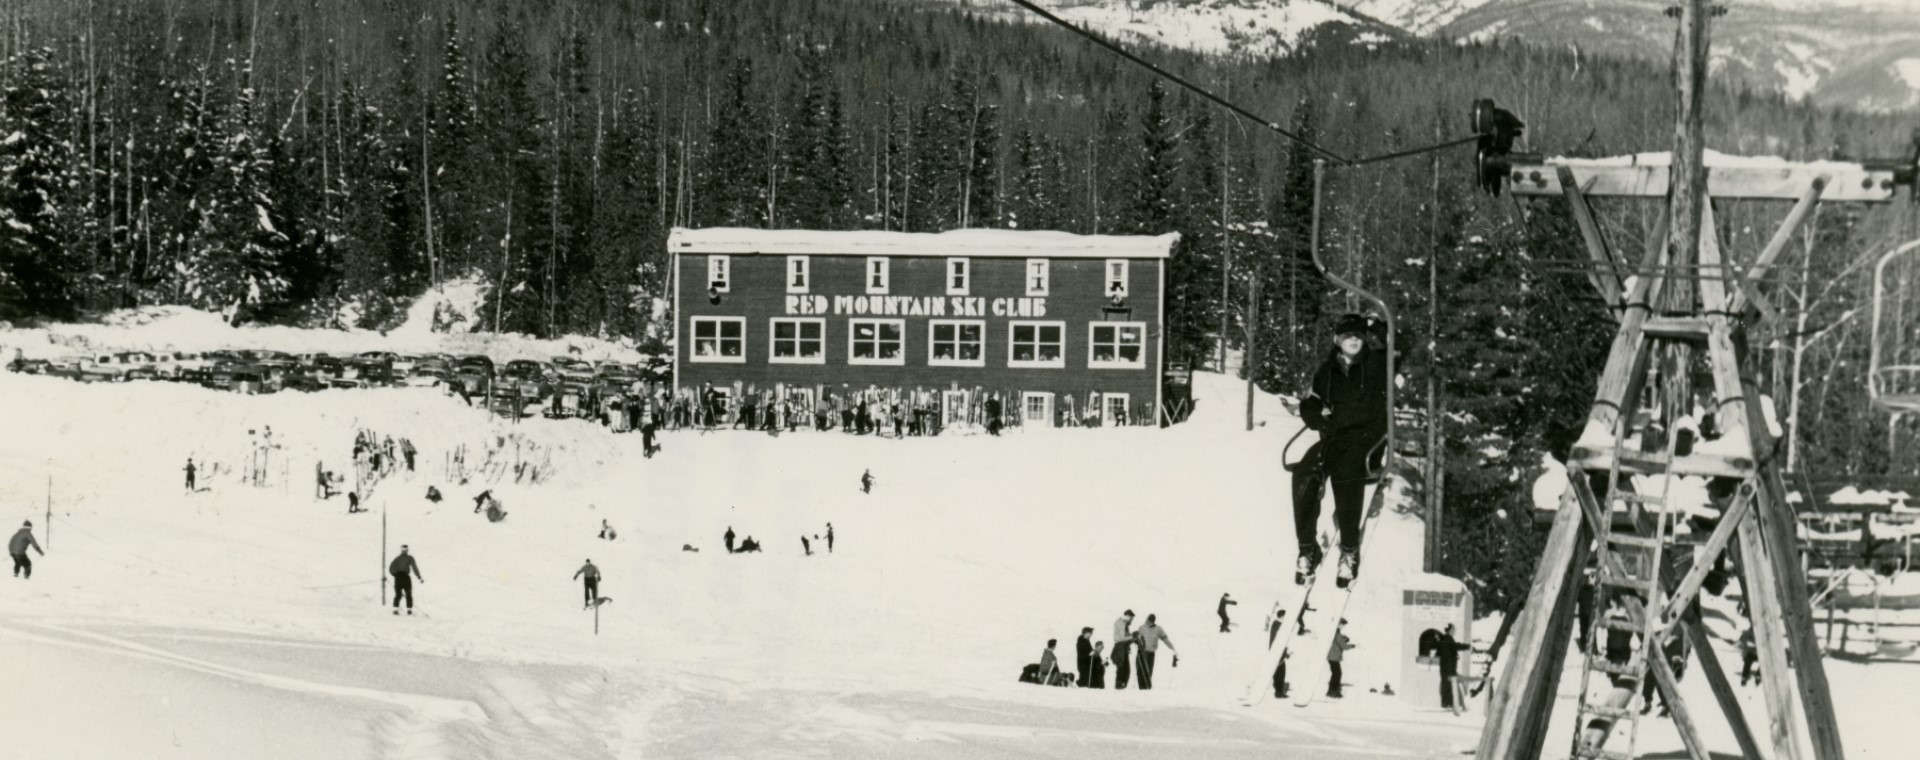 A black-and-white photo of a skier riding up a chair lift. In the distance is the Red Mountain Ski Club Lodge.